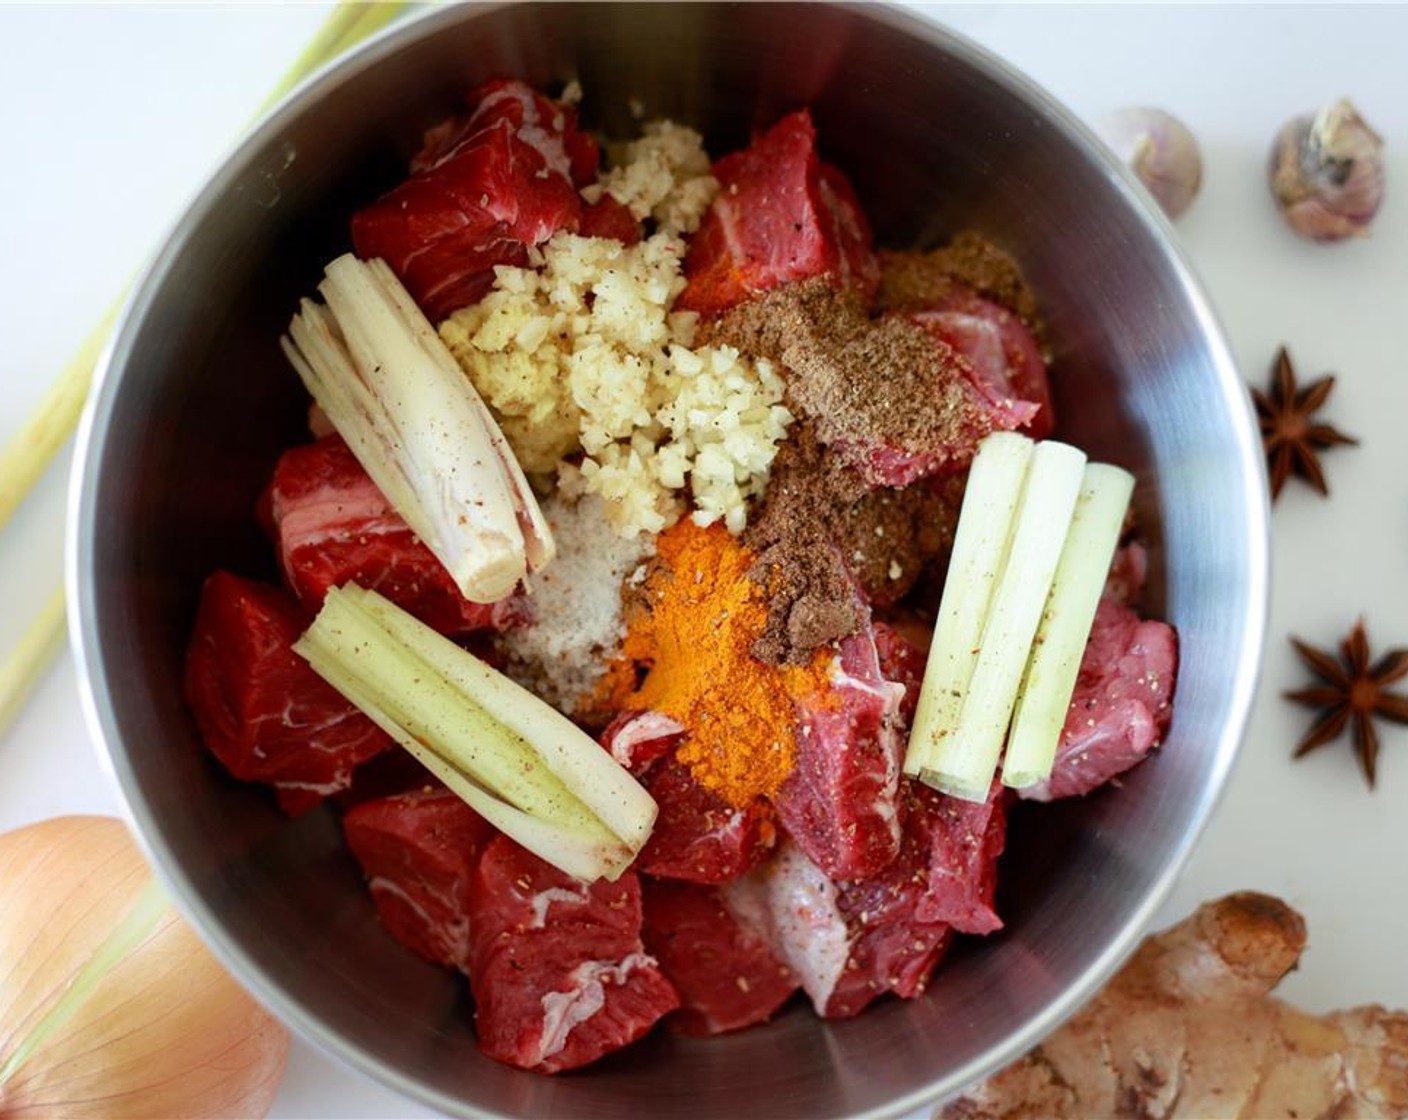 step 3 Place the Cubed Beef in a bowl and add Fish Sauce (2 Tbsp), smashed and cut Lemongrass (1), Fresh Ginger (1), {@10:}, Black Peppercorns (1 tsp), Sea Salt (3/4 tsp), Ground Turmeric (1/2 tsp), Ground Cinnamon (1/2 tsp), Ground Cumin (1/2 tsp), Sweet Paprika (1/2 tsp), and Fennel Seeds (1/4 tsp). Mix well, and set aside.